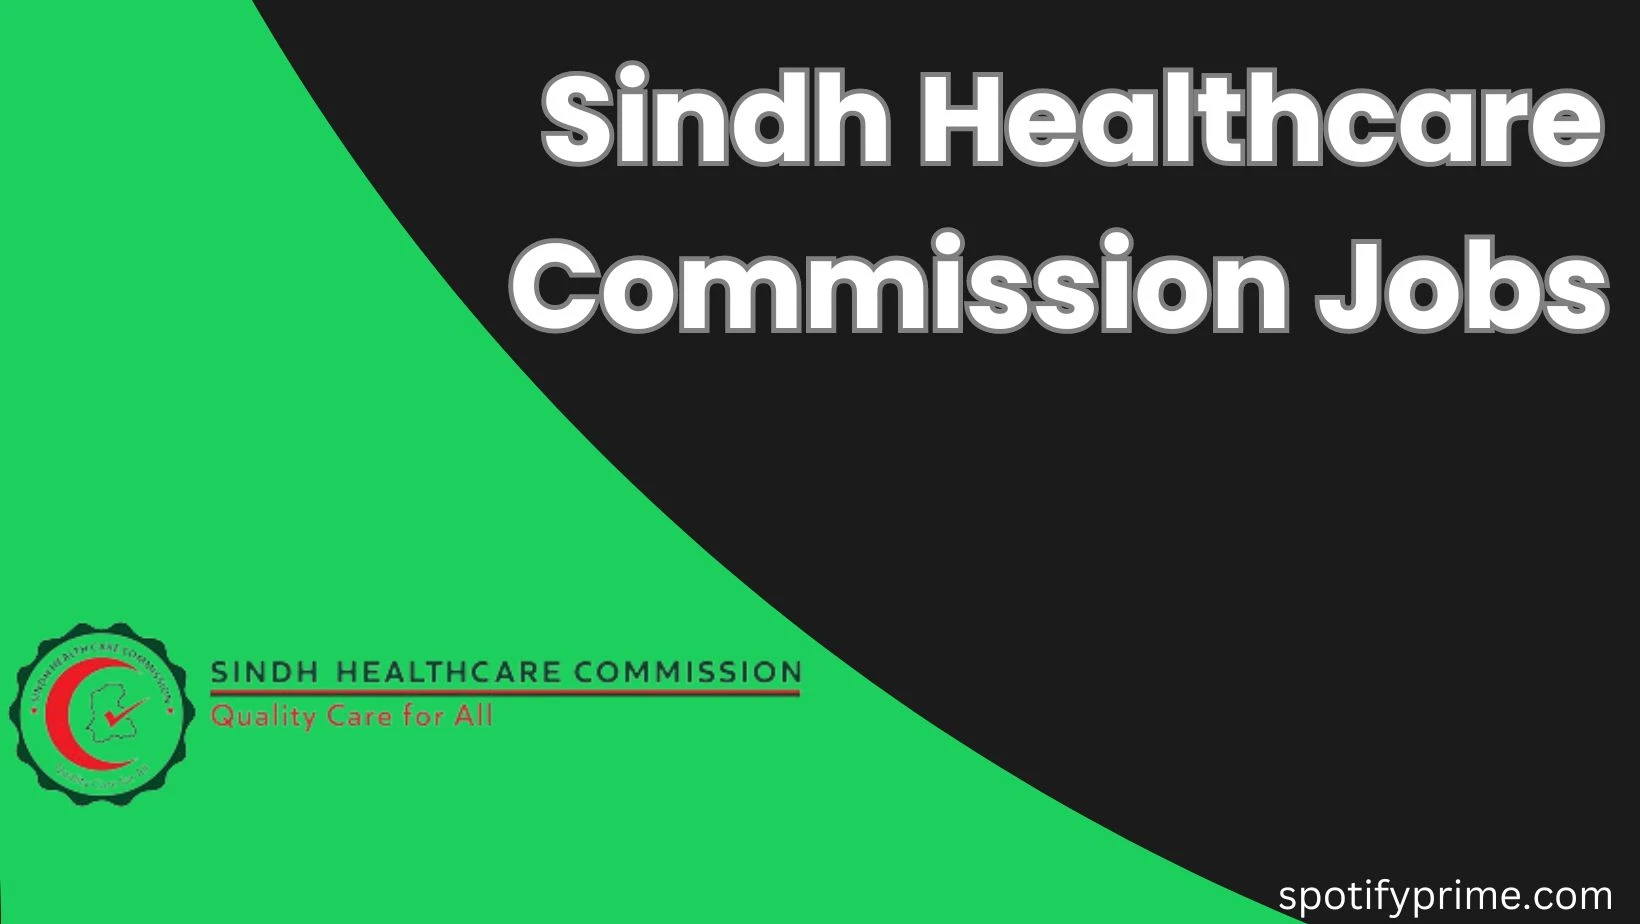 Sindh Healthcare Commission Jobs